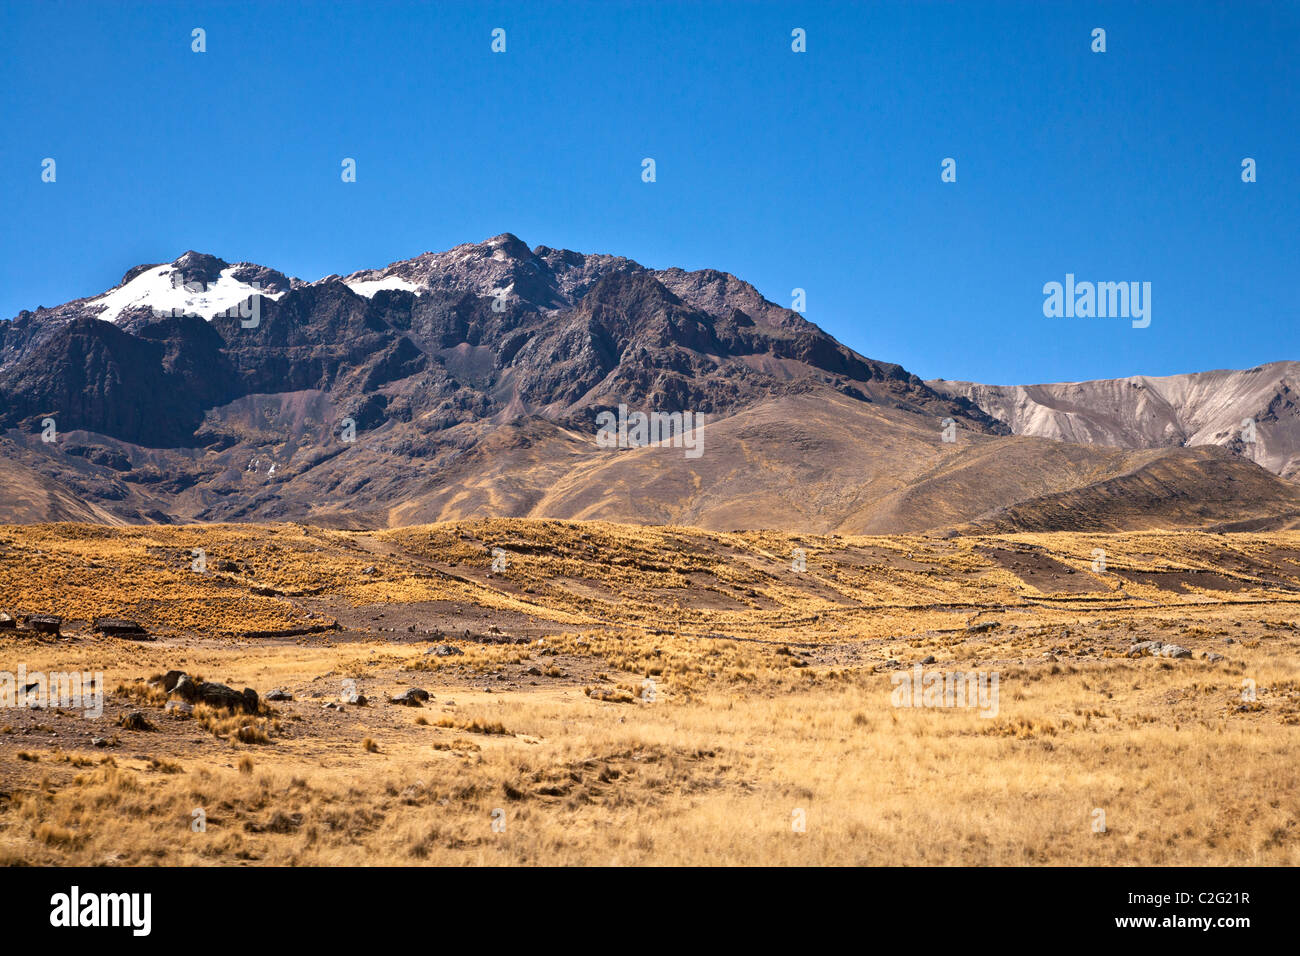 Altiplano or High Plain or Plateau of the Andes near Puno on Lake Titicaca in Peru, South America Stock Photo